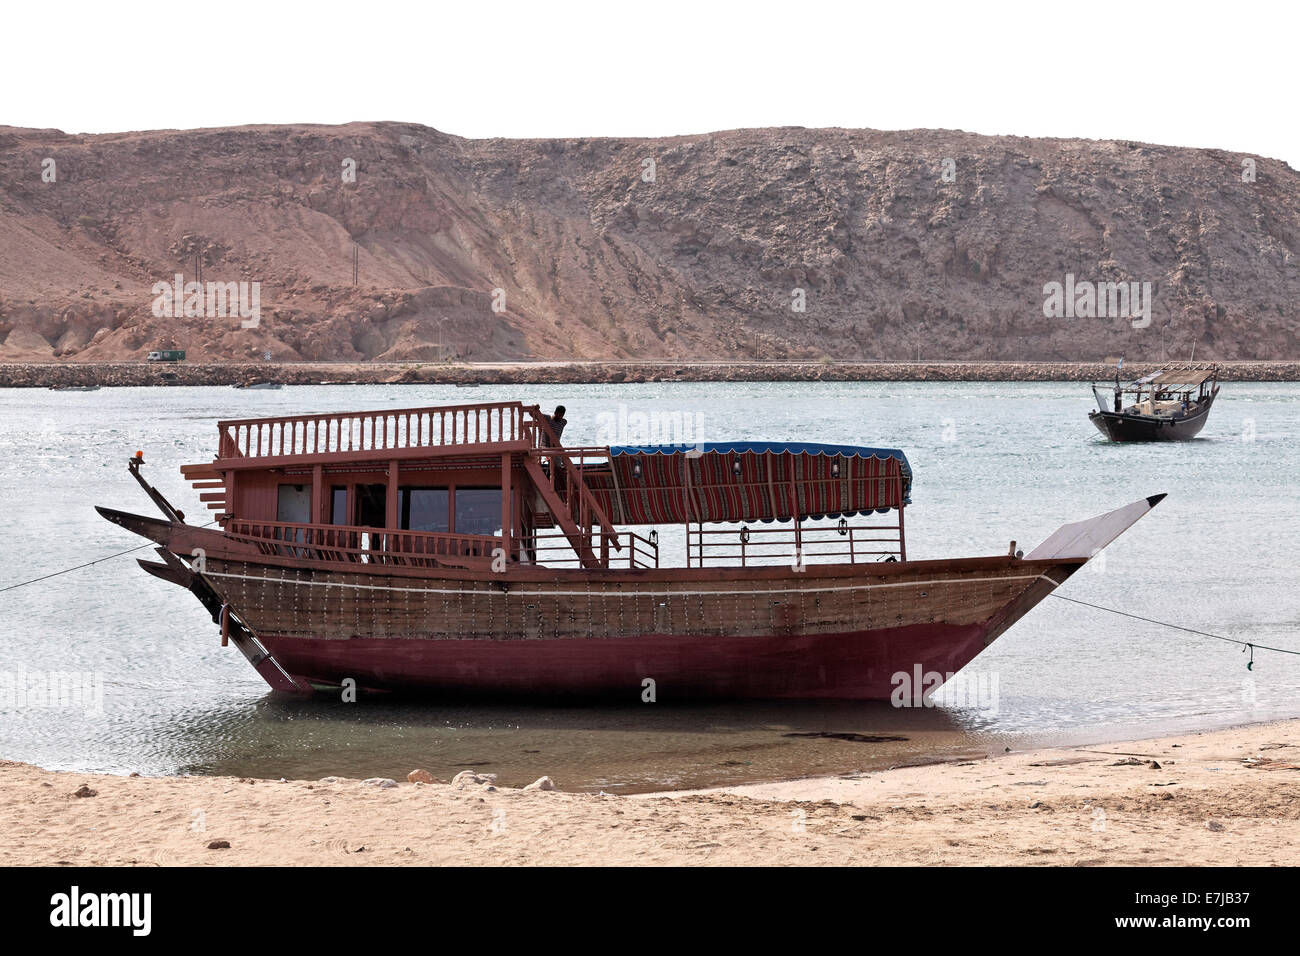 Dhow-ships in the harbour of Sur, Ash Sharqiyah province, Sultanate of Oman, Arabian Peninsula Stock Photo